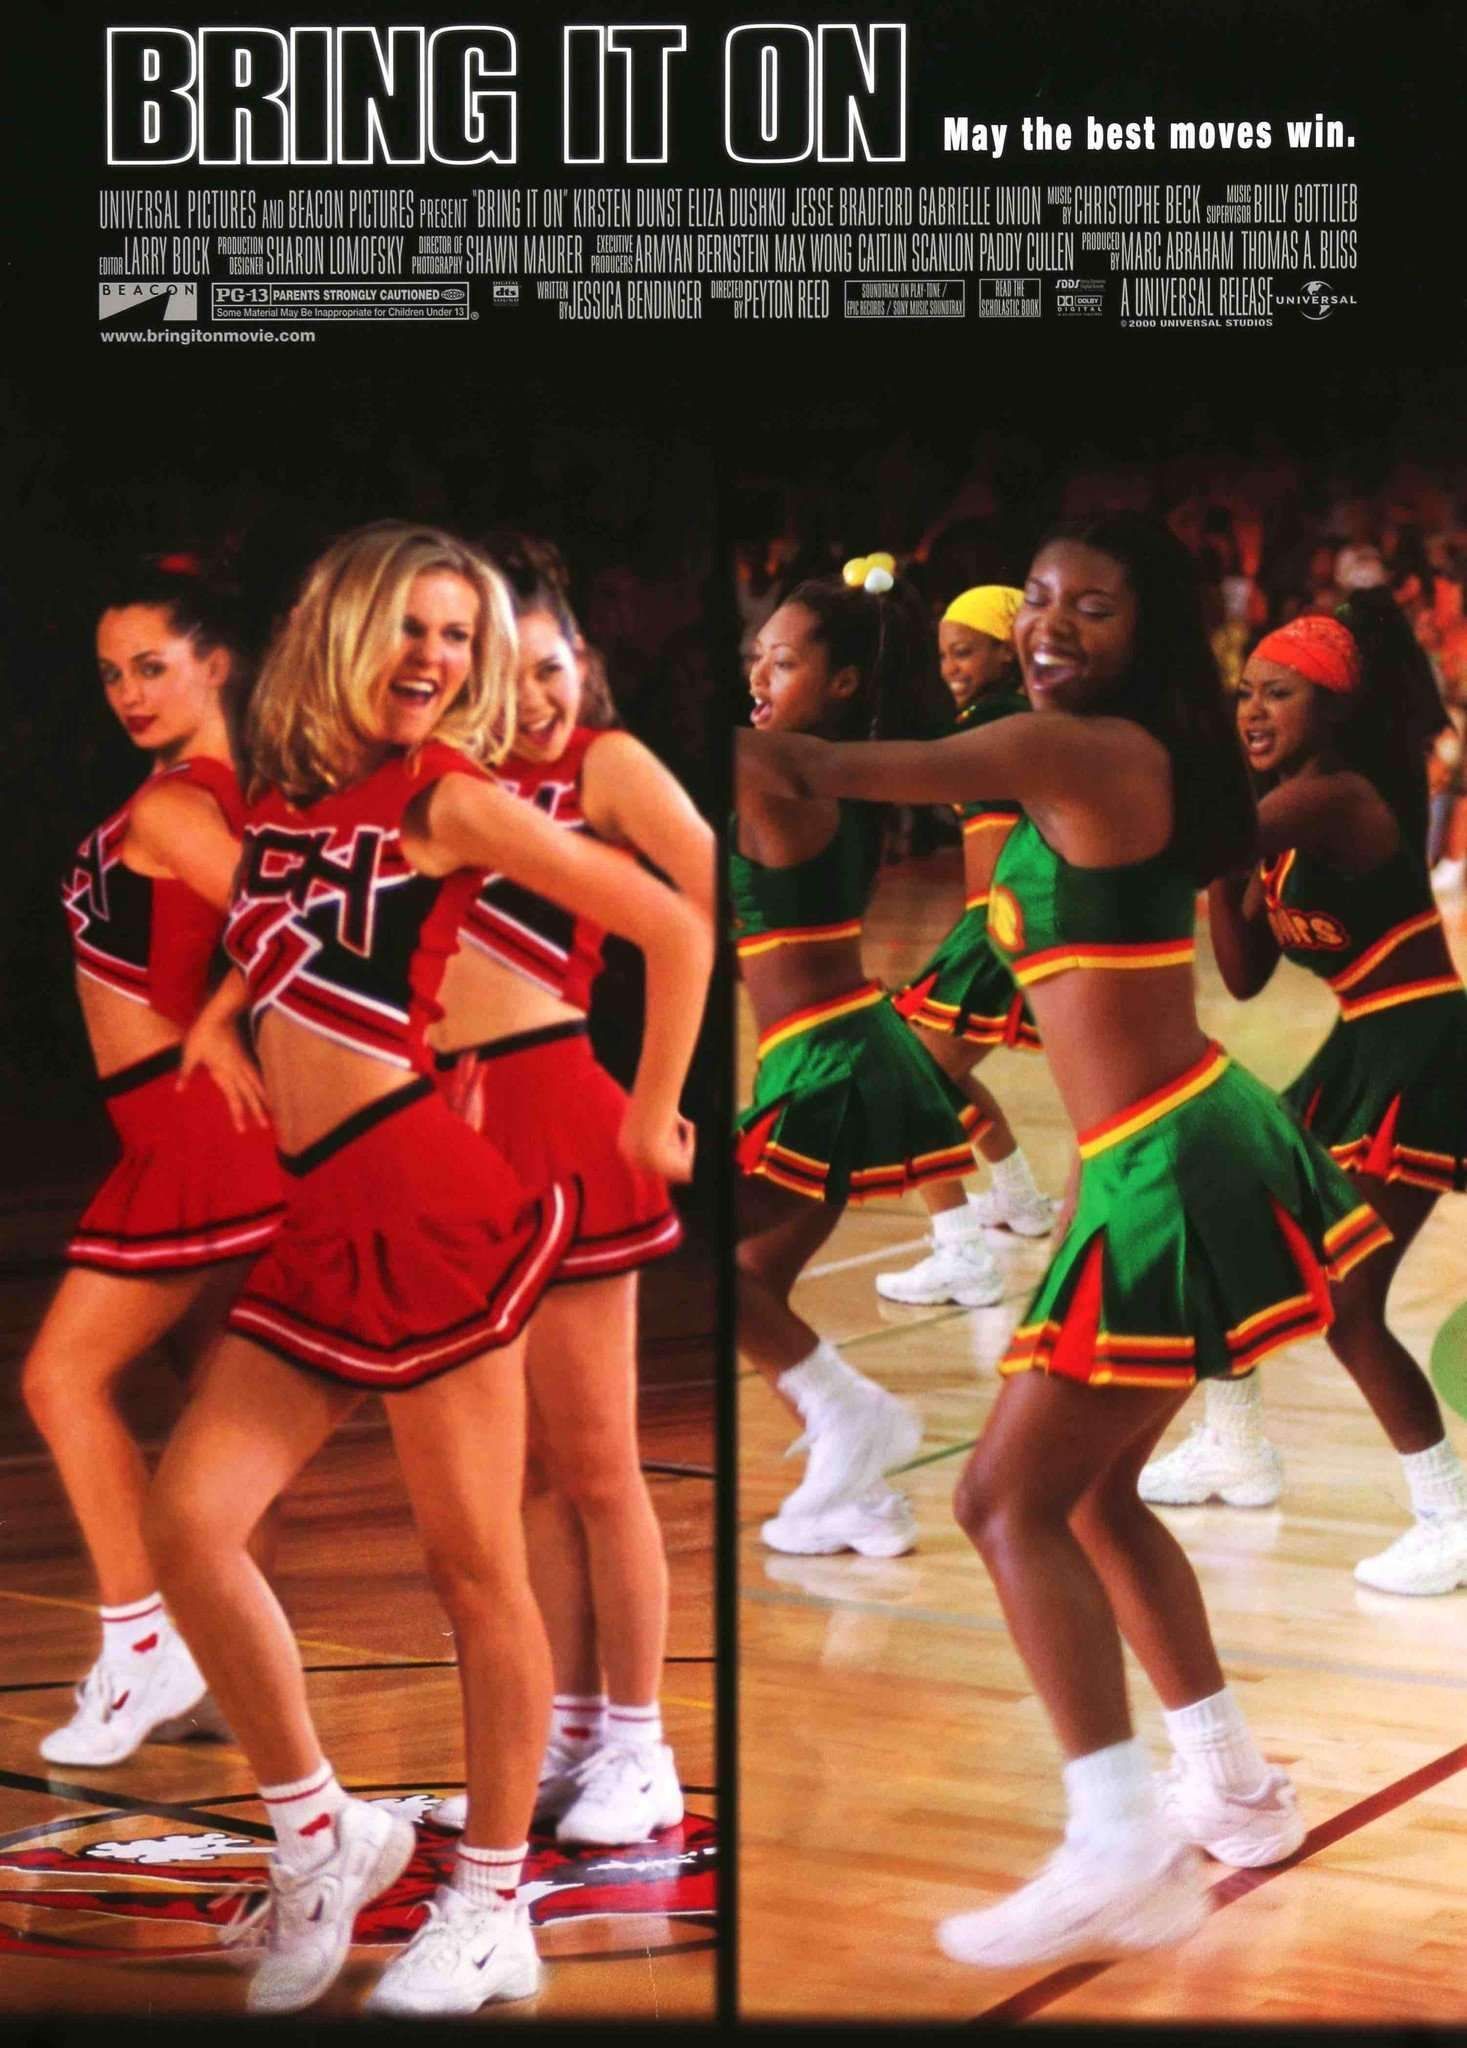 Bring It On Film Poster